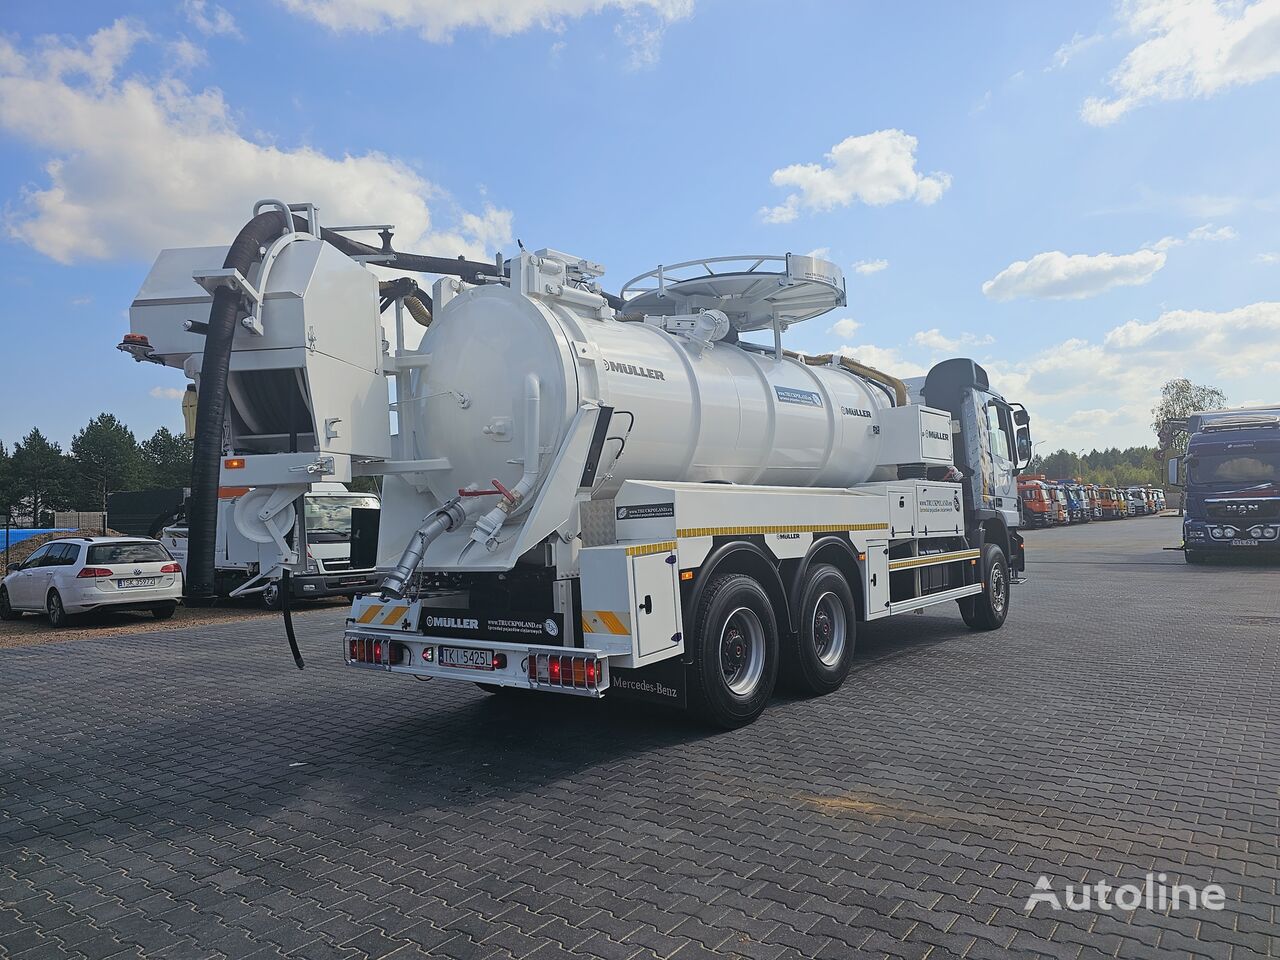 Mercedes-Benz CANALMASTER WUKO MULLER KOMBI FOR CHANNEL CLEANING sewer jetter truck